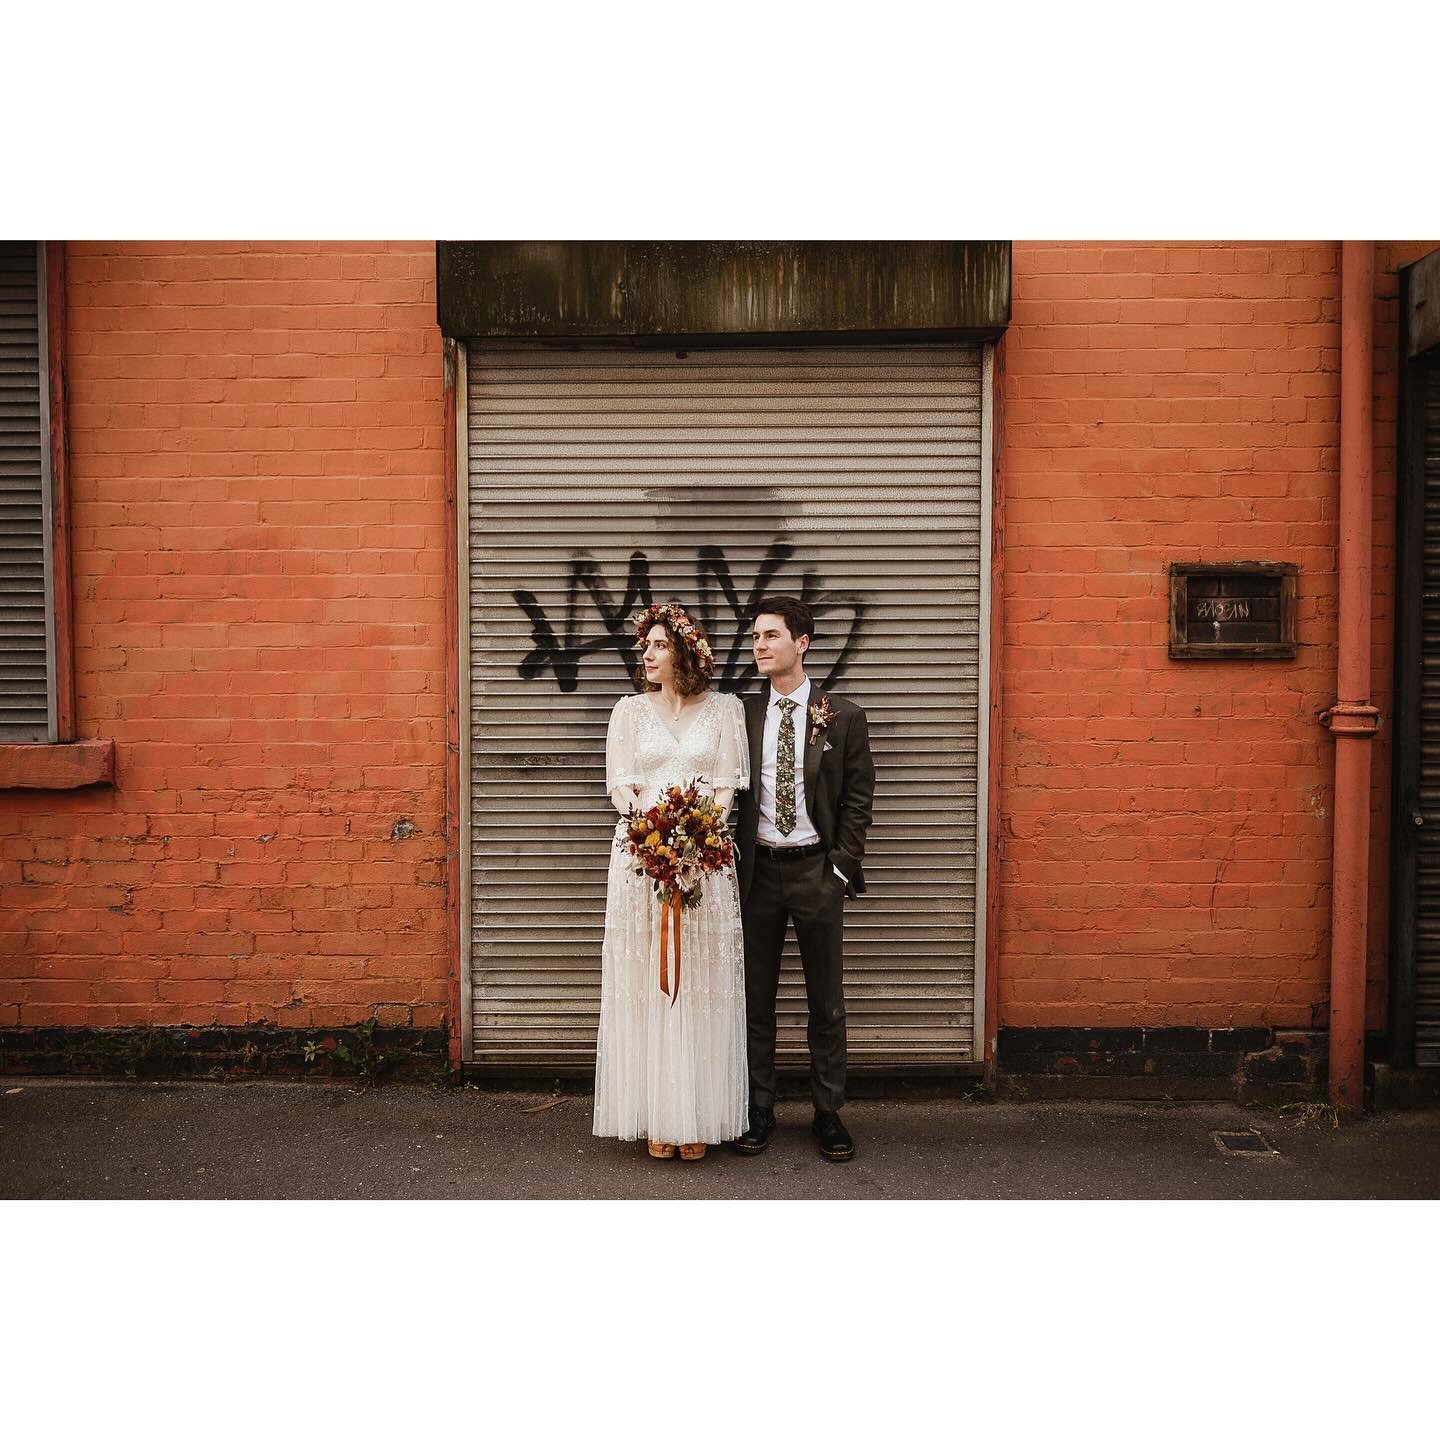 A few more frames from last weekends city centre wedding in Sheffield with Ruth &amp; Stan at The Botanical Gardens &amp; @99marystreet - link in profile bio @photography_34 to see more from their day.

//

Dress - @needleandthreadlondon
Shoes - @swe